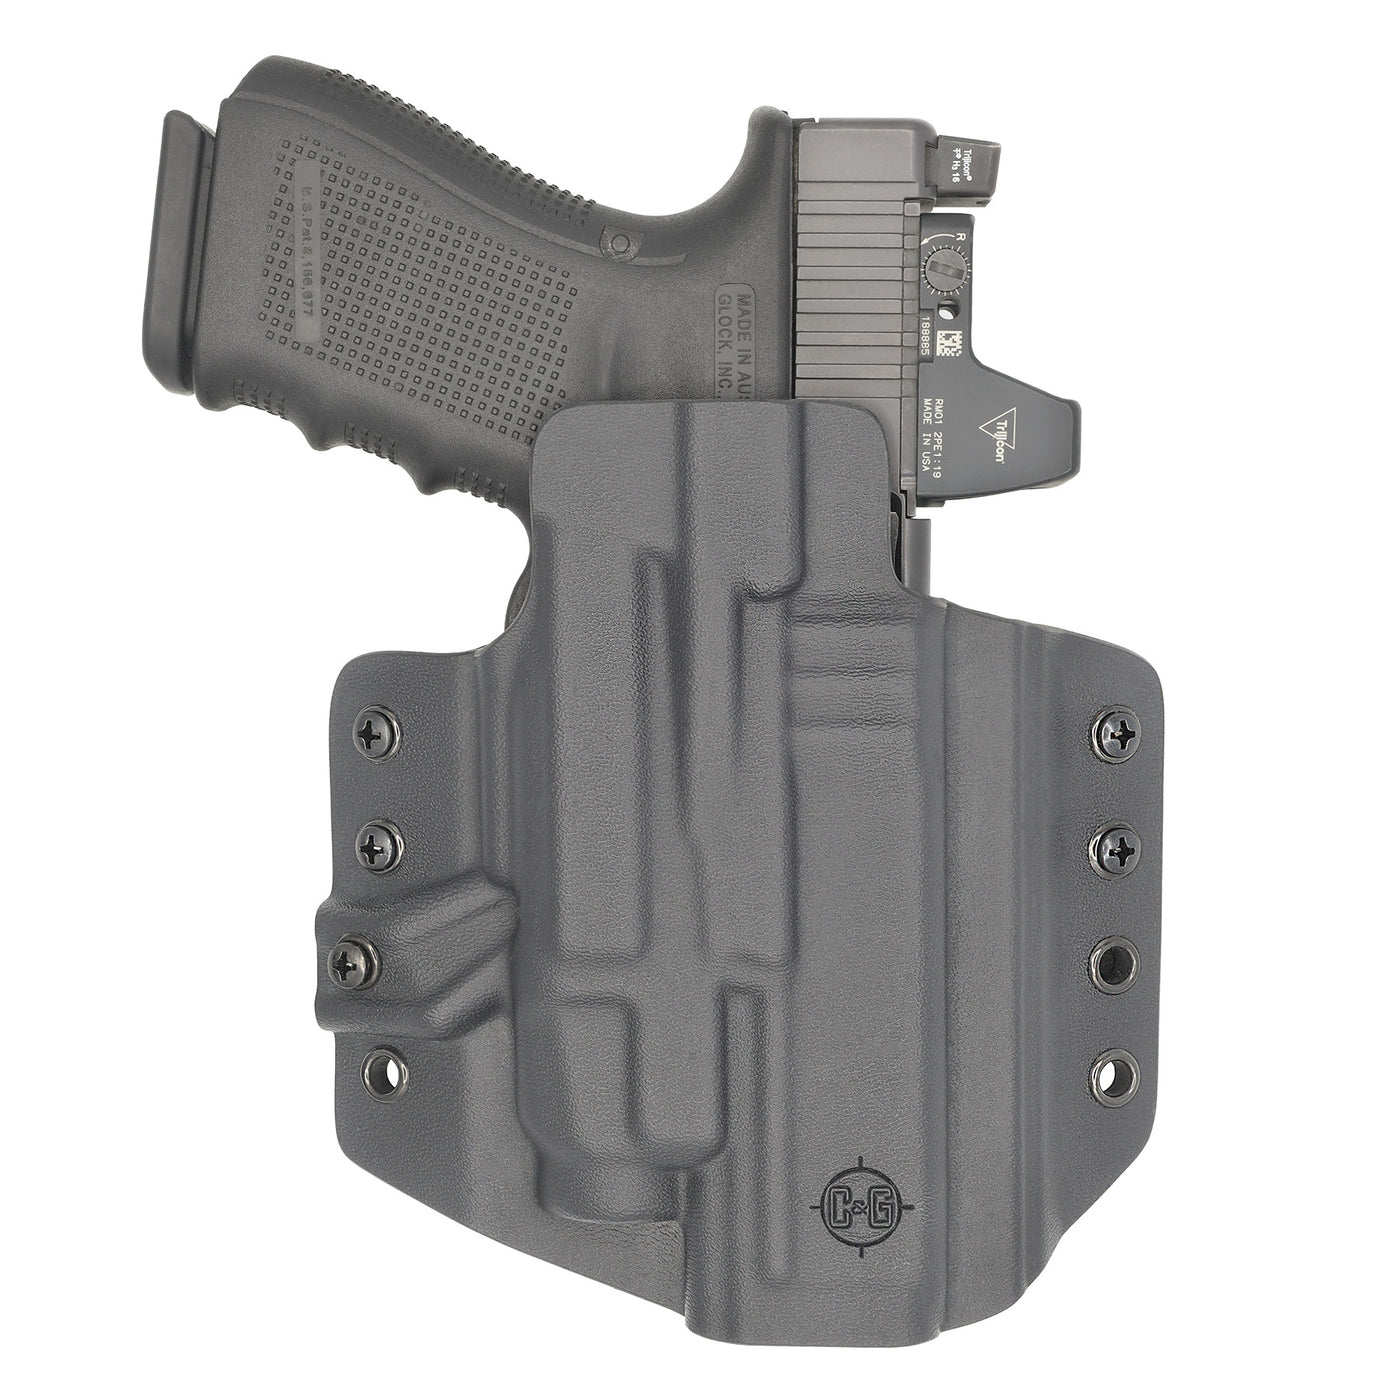 C&G Holsters custom OWB Tactical CZ P10/c streamlight tlr7/a in holstered position